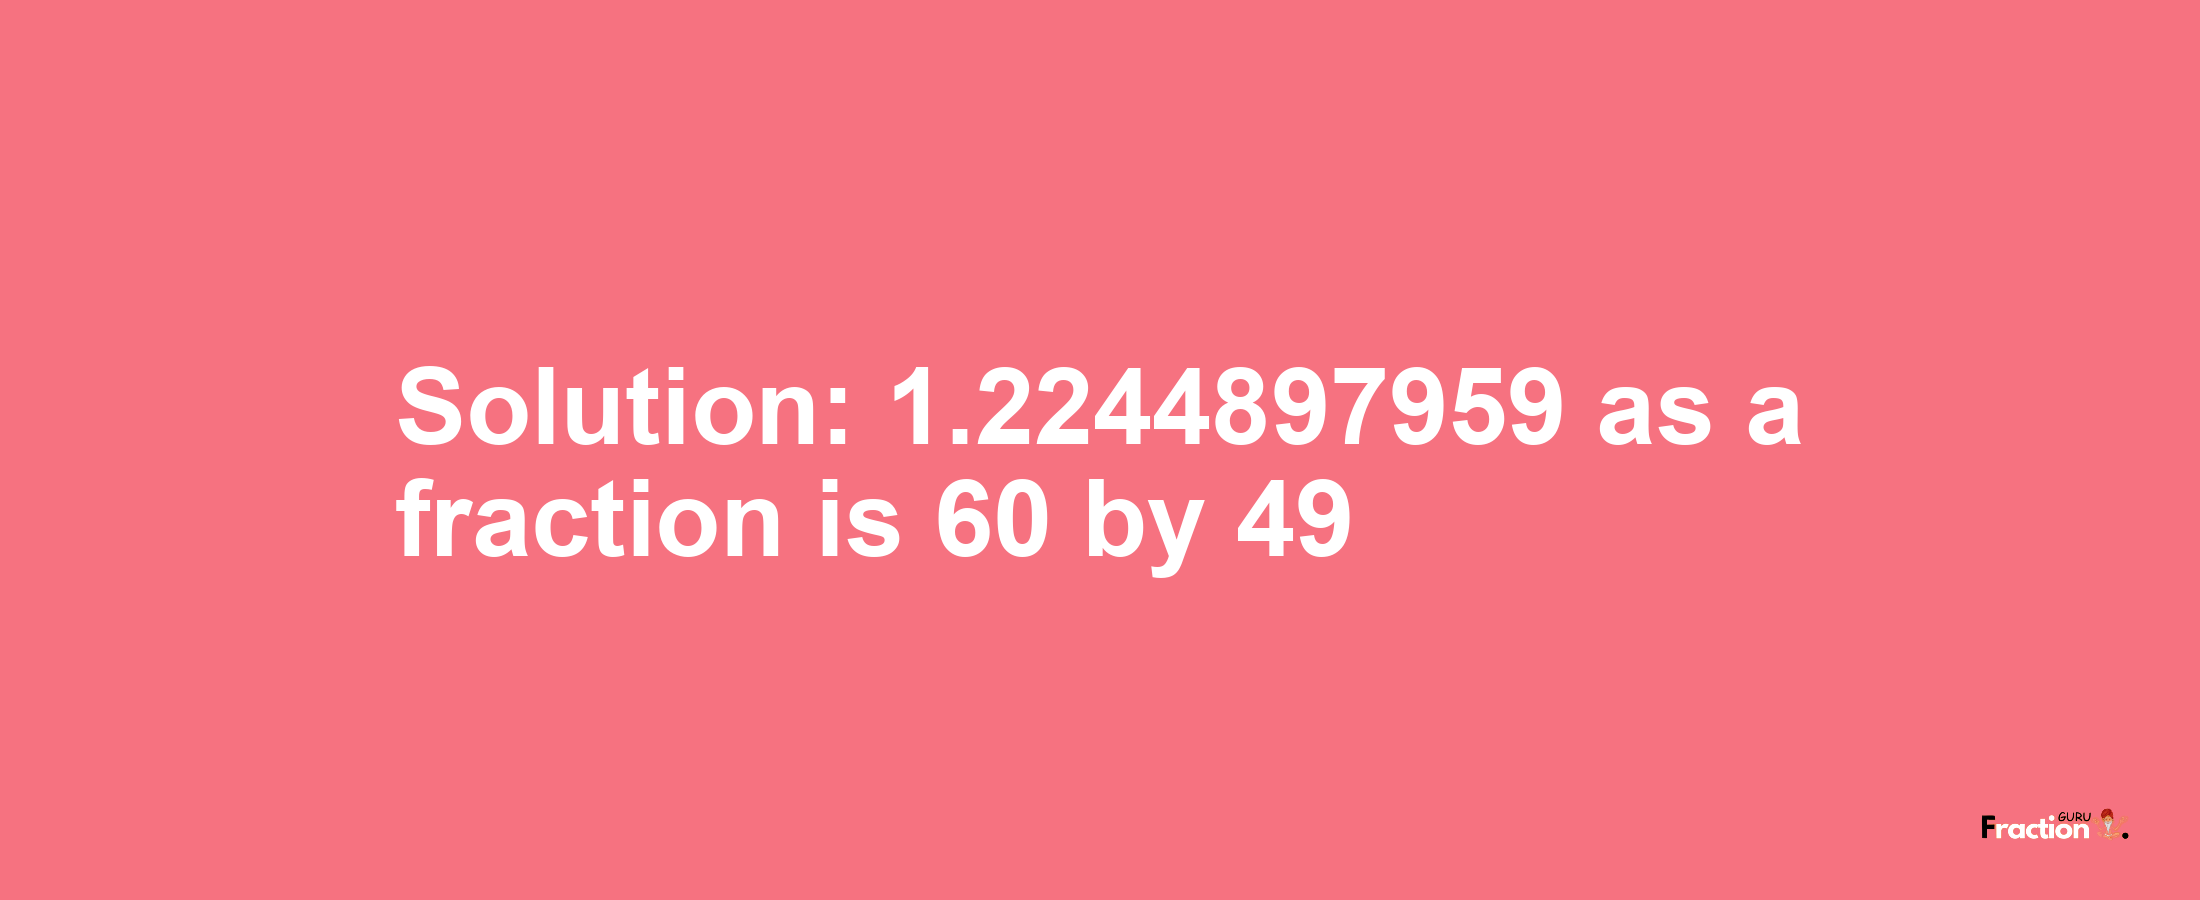 Solution:1.2244897959 as a fraction is 60/49